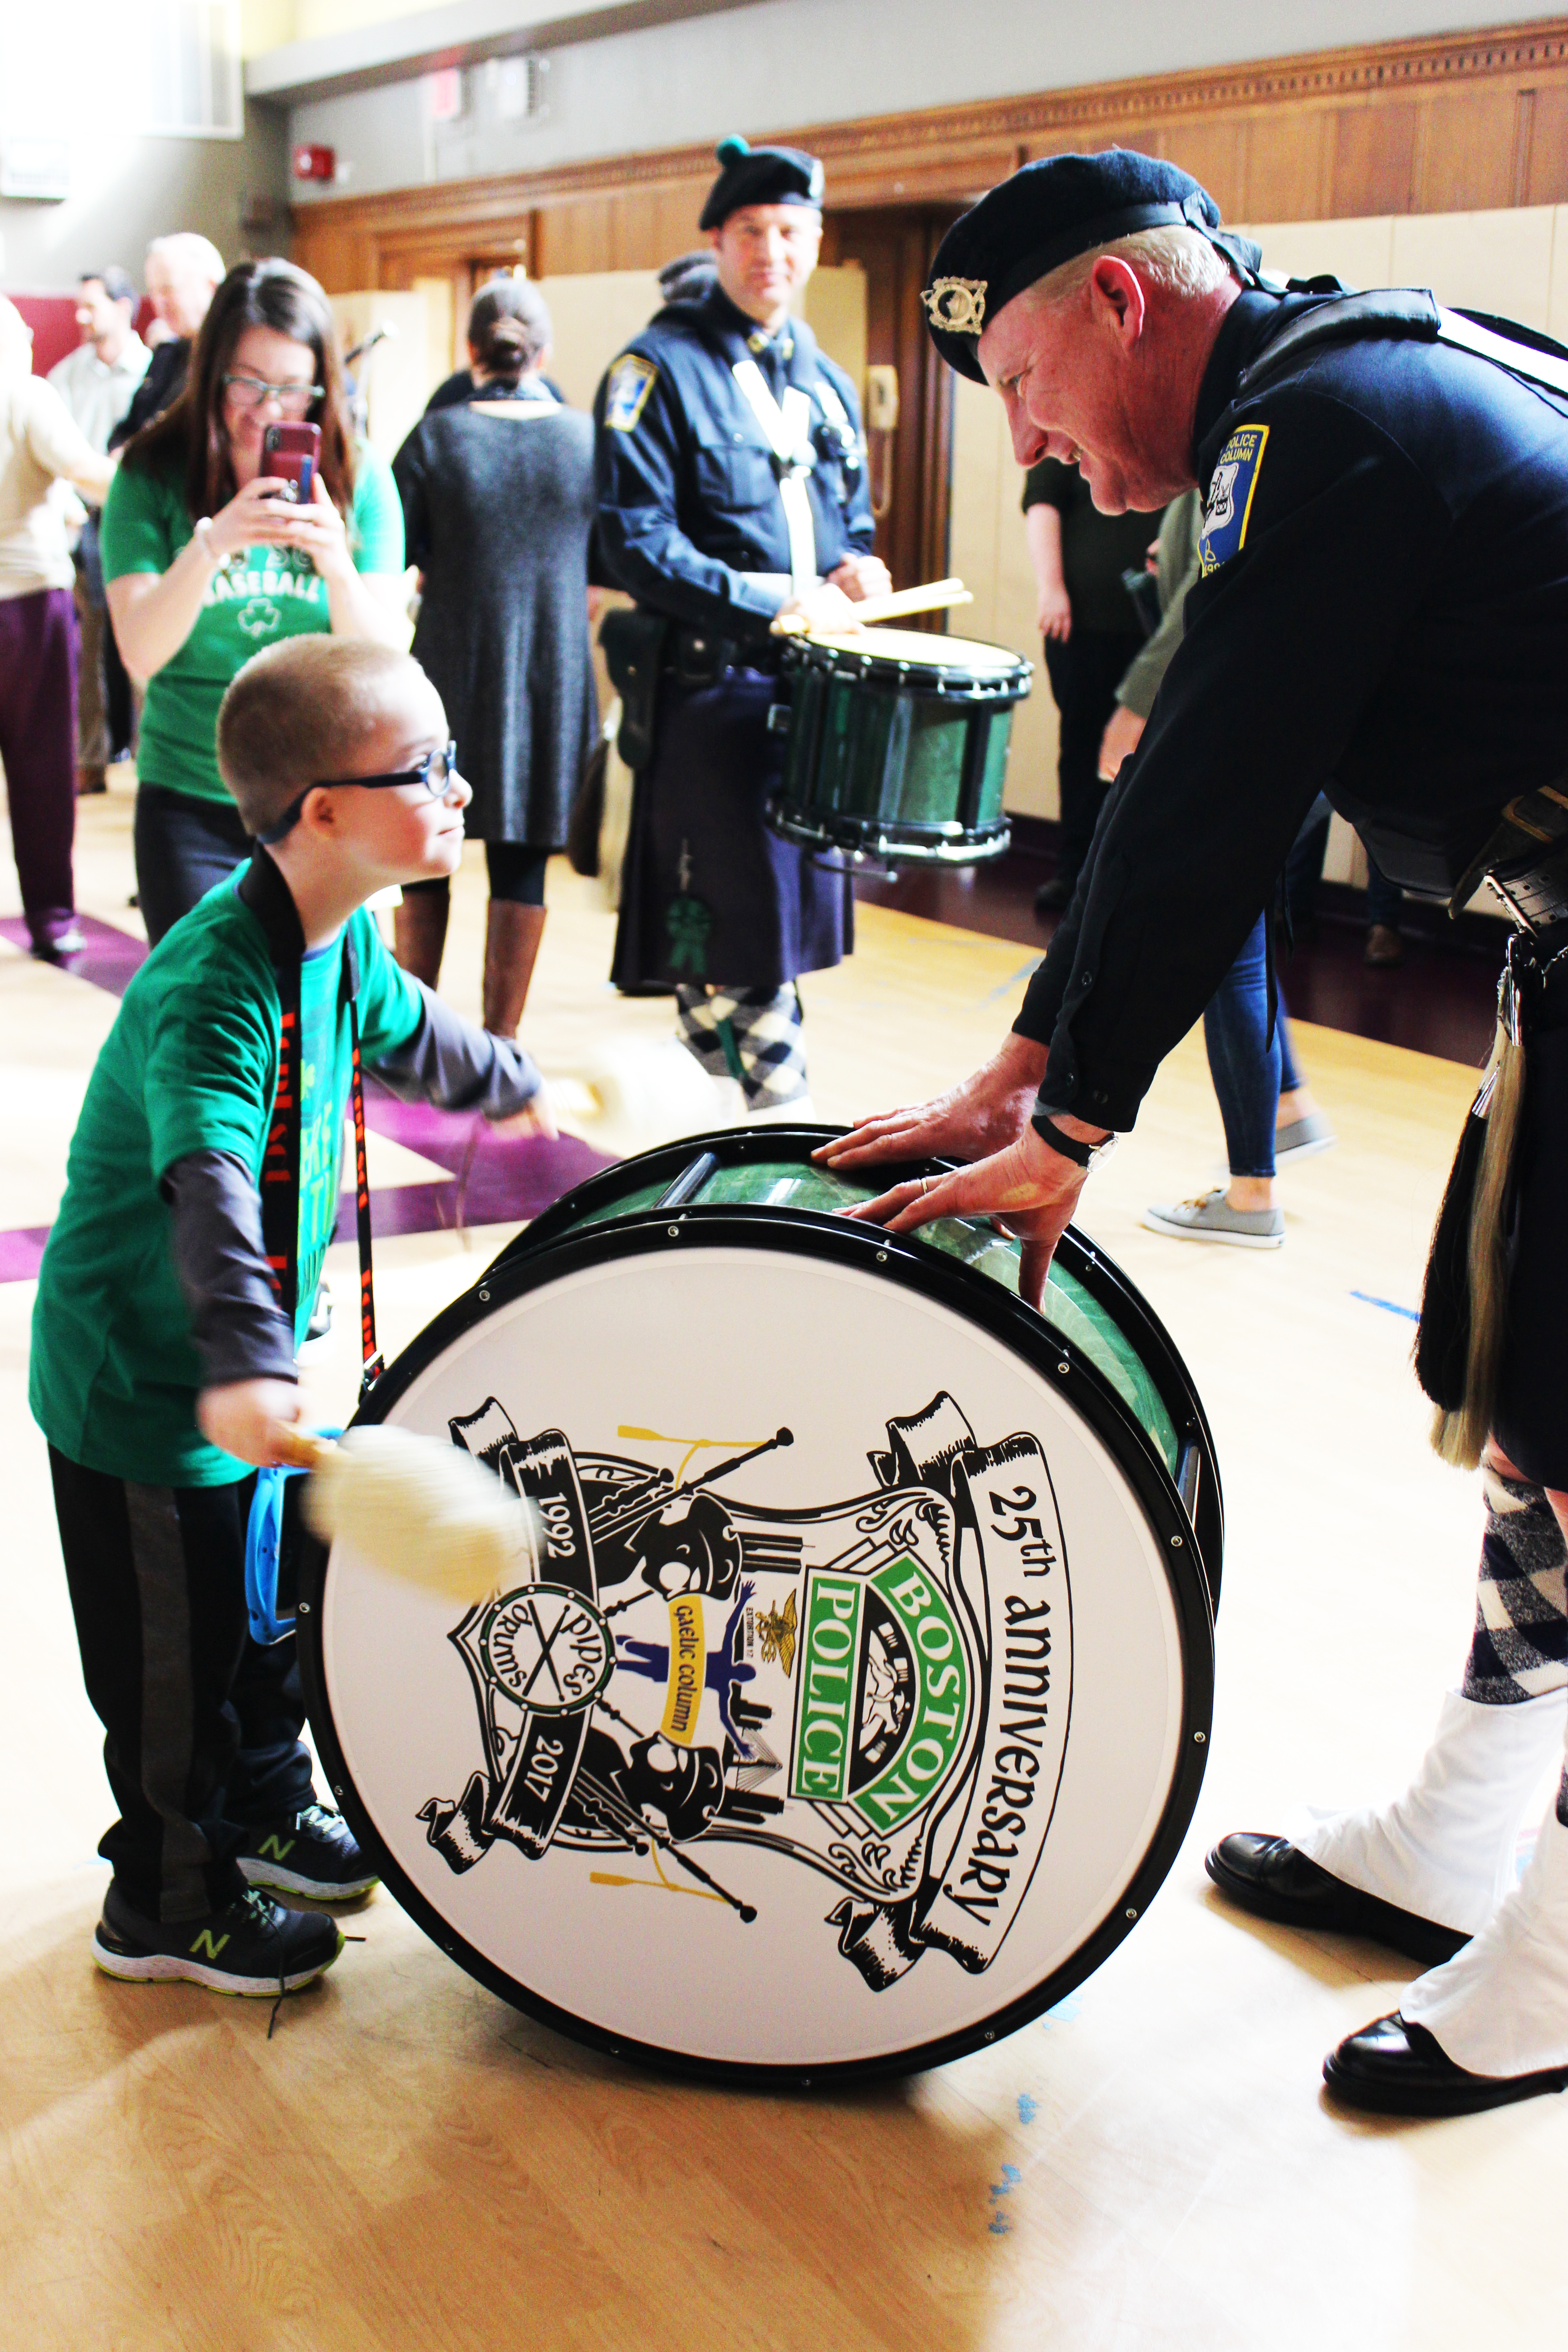 Boston Police Department perform for patients and students during their annual Pipes and Drums visit.